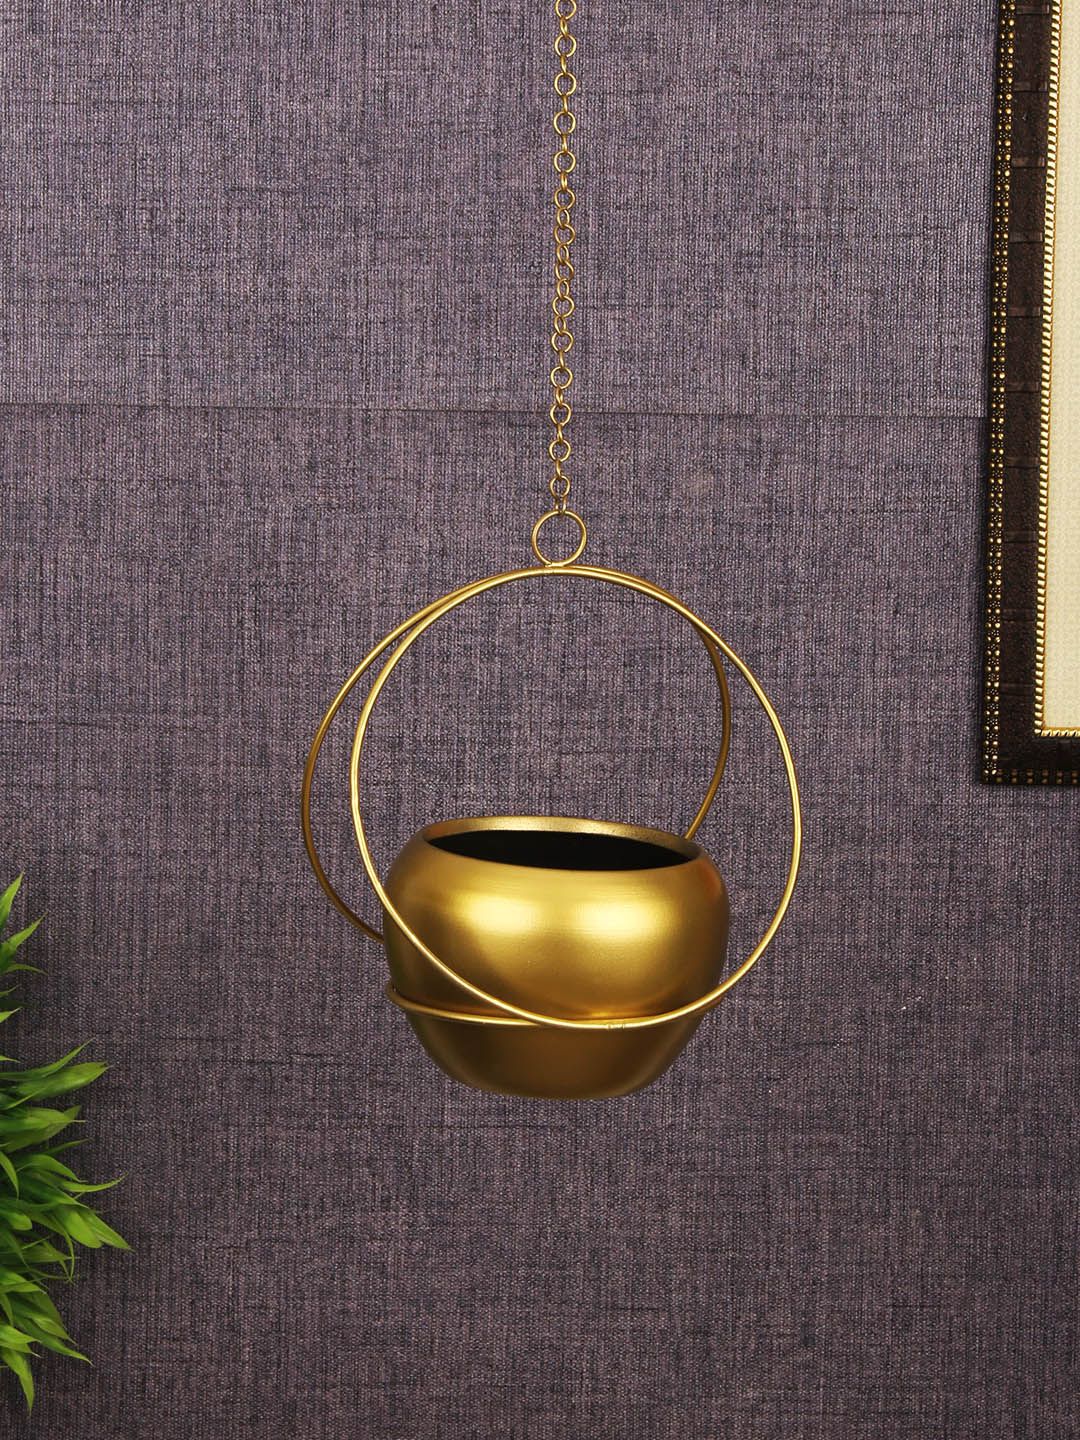 TIED RIBBONS Gold-Toned Solid Metal Hanging Planter Price in India